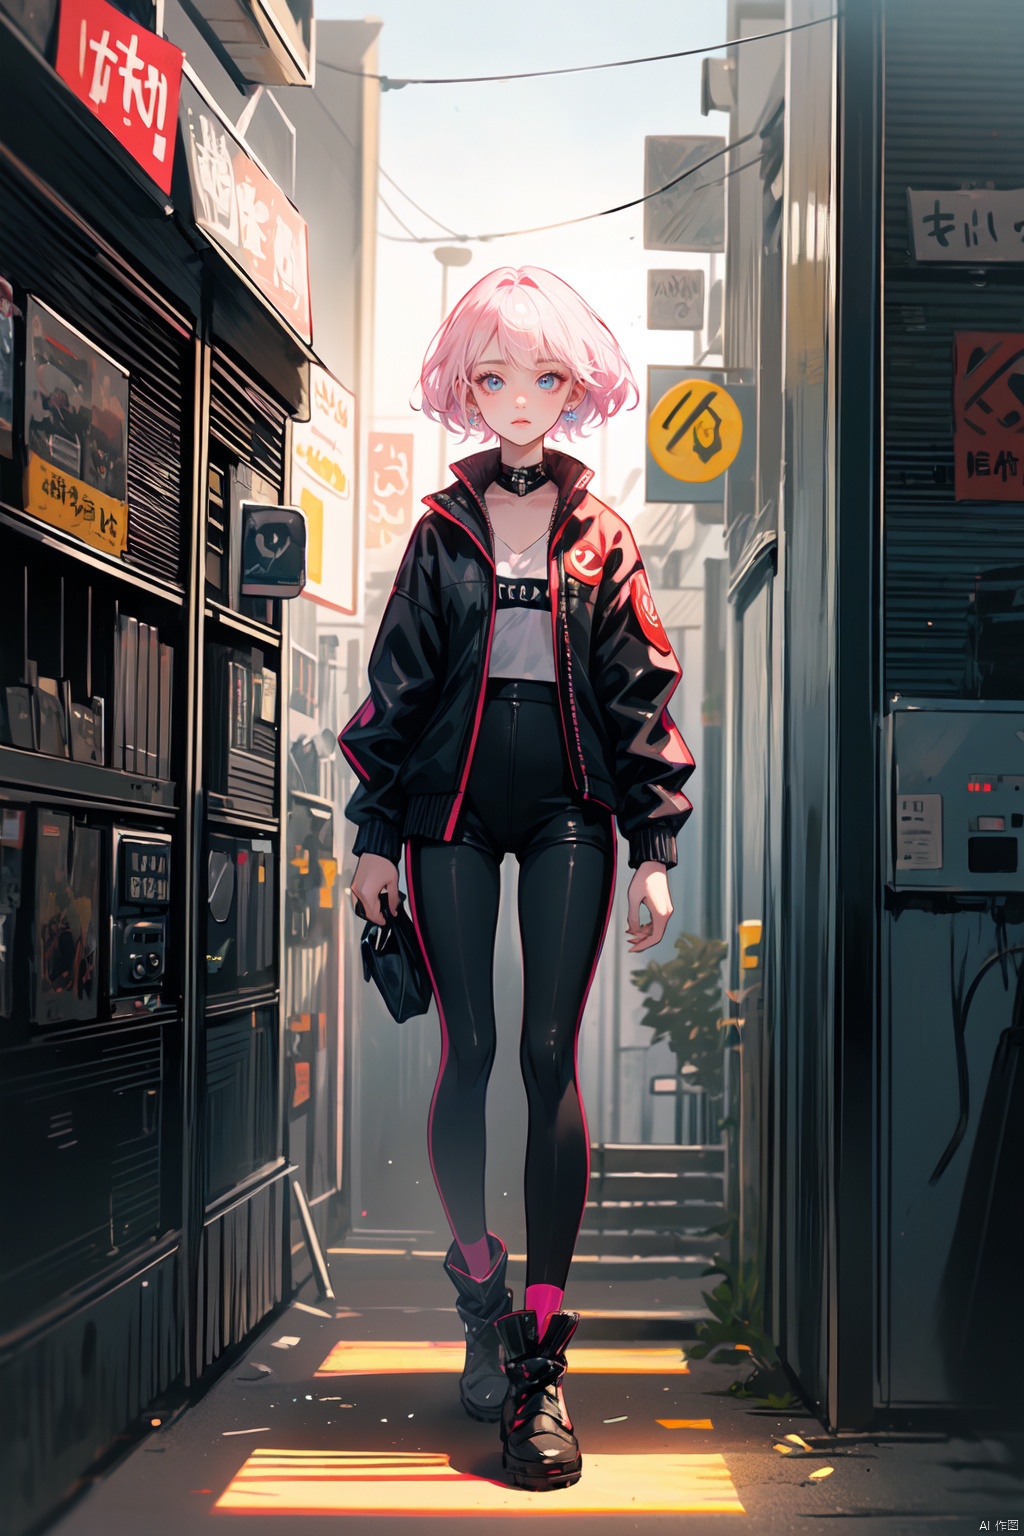  (8k, contemporary Chinese streetwear style, trendy quality), vividly-detailed, (vibrant, youthful skin with a confident and fashionable look), 1girl, full body, cyberpunk aesthetic, fierce and determined look, electric blue eyes with augmented glow, short neon pink hair styled in a rebellious cut, sporting a futuristic tactical visor over her eyes, wearing a form-fitting black neoprene catsuit embedded with glowing circuit patterns and liquid chrome accents, revealing hints of bio-mechanical enhancements beneath the fabric, high-tech armored boots with retractable micro-spike soles, standing on a rain-soaked rooftop in a sprawling dystopian metropolis illuminated by holographic billboards and neon lights, wielding a plasma saber in one hand and a compact smart-linked pistol in the other, cybernetic arms adorned with modular components and hidden compartments, cybernetic implants visible along her neck and spine, tattoos of binary code snaking across her exposed skin, backed by a towering skyline of interconnected megastructures and hovering drones, embodying the spirit of resistance and survival in a world of advanced technology and corporate control.((poakl))